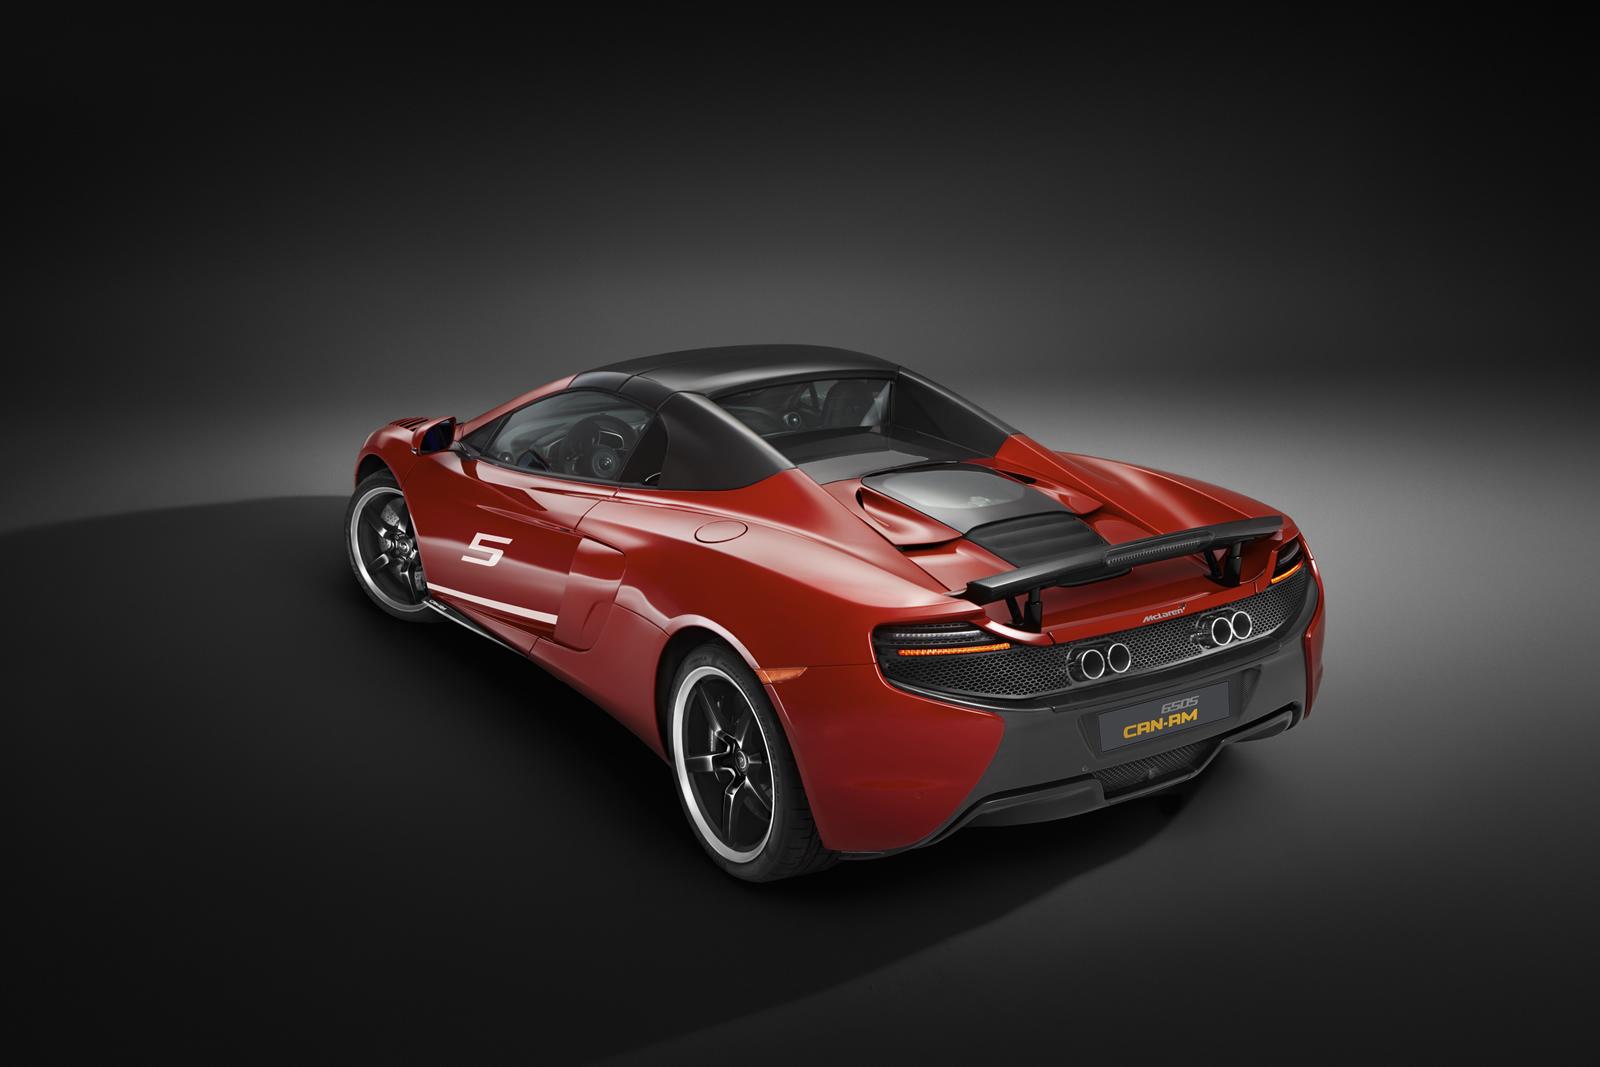 Mclaren 650s Spider Can Am Special Edition High Res Pictures HD